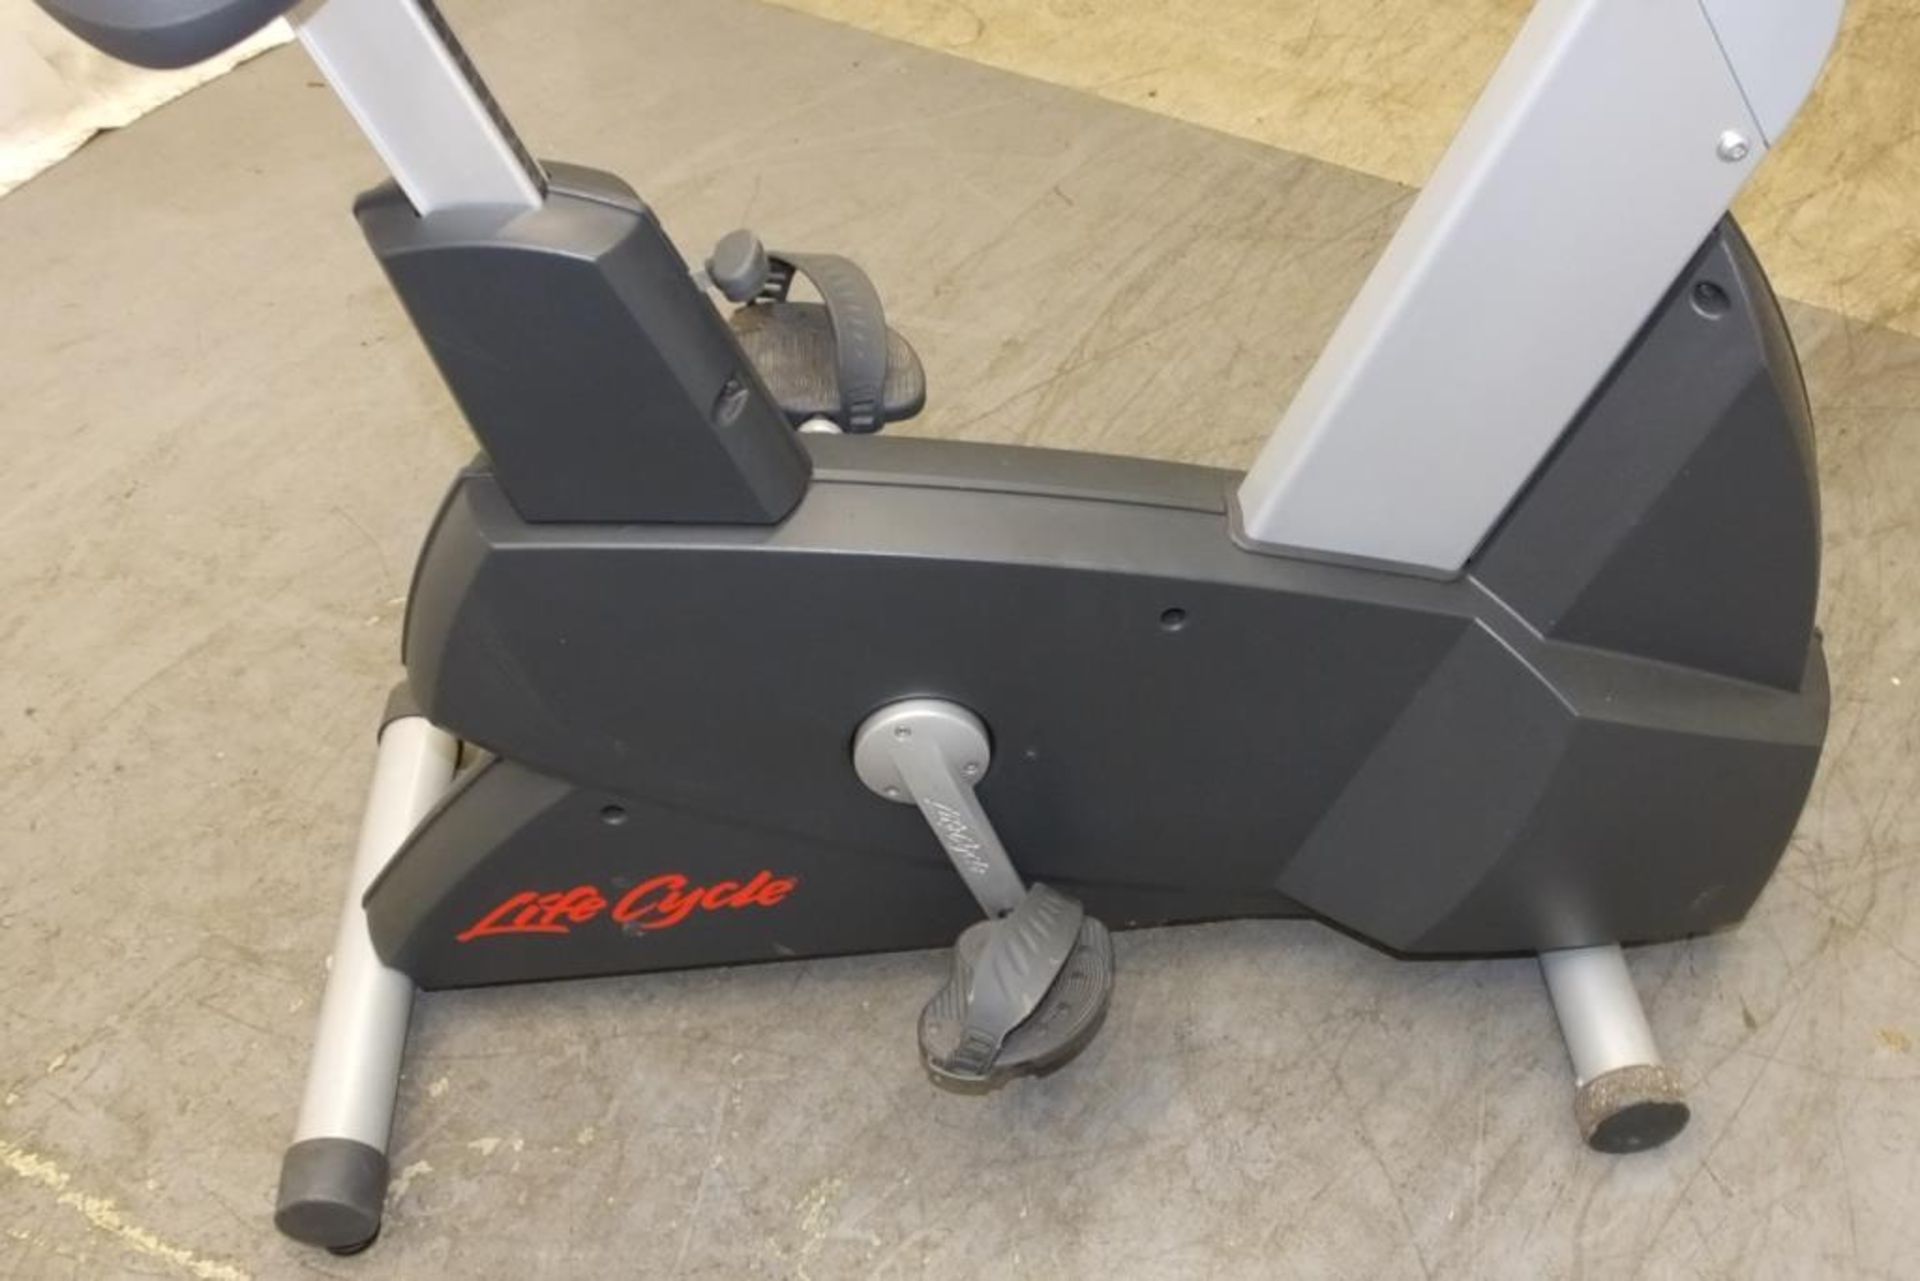 Life Fitness CLSC Exercise Bike - powers up - functionality untested - Image 3 of 9